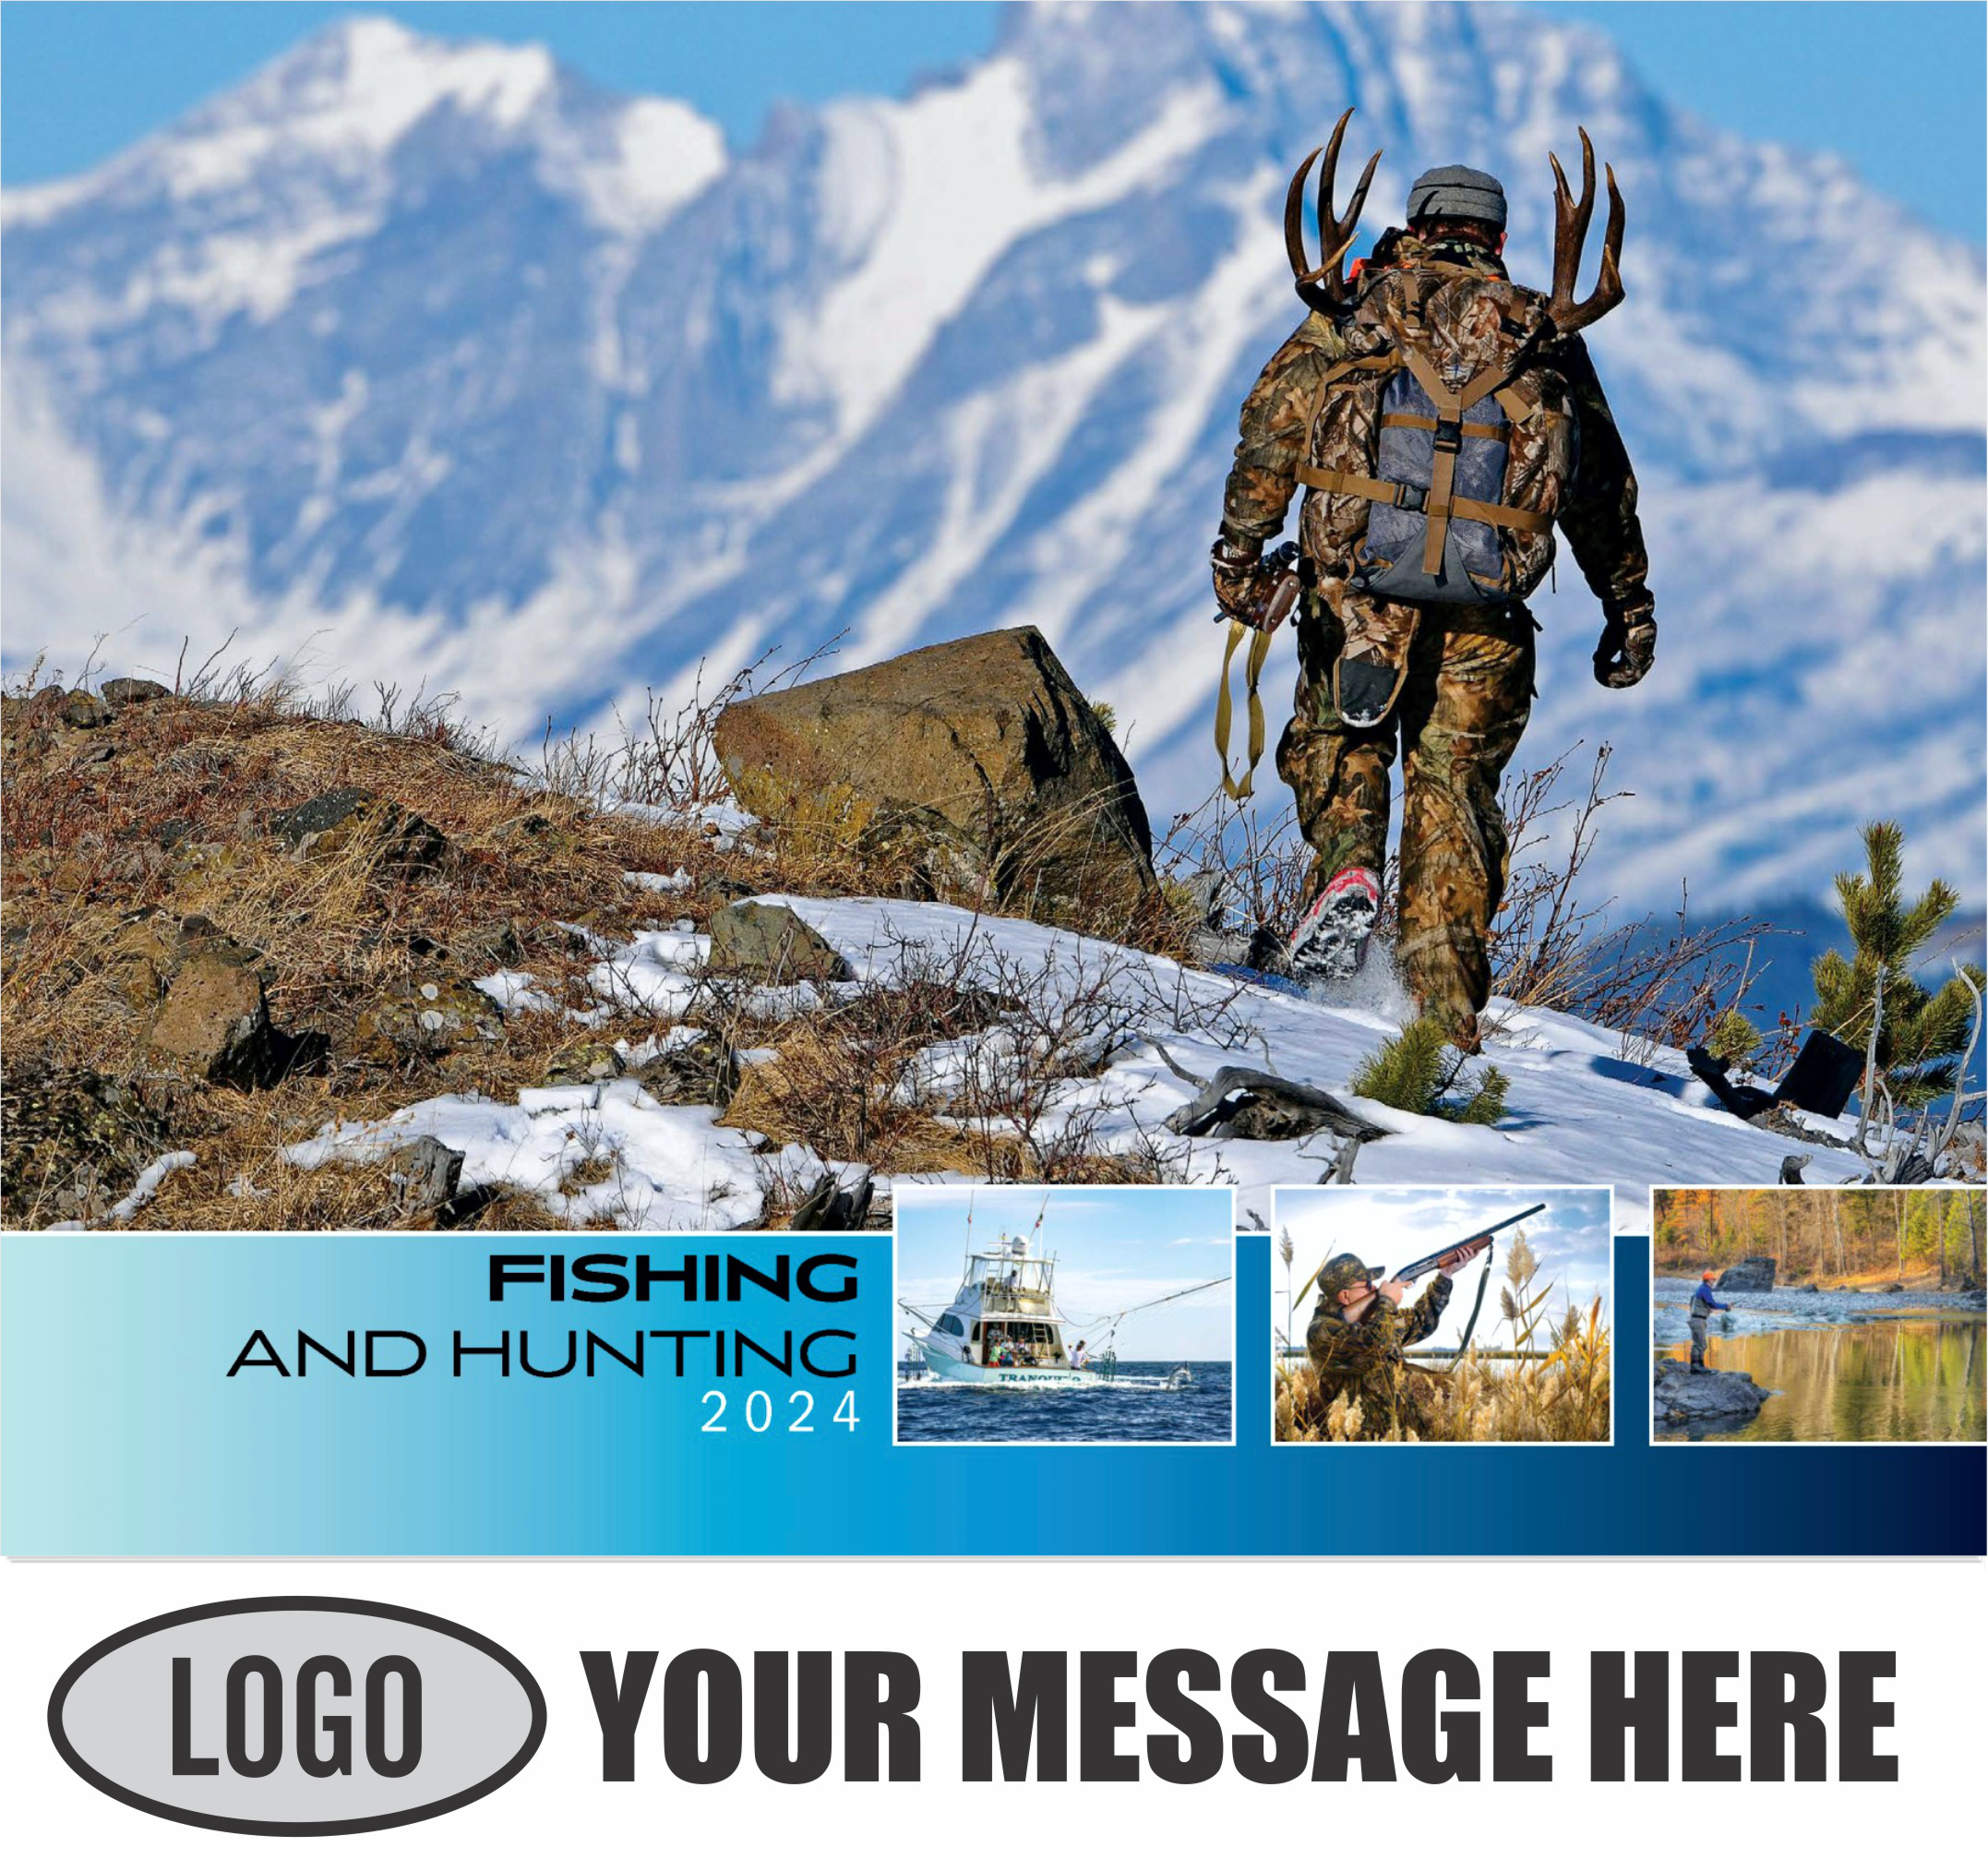 Fishing and Hunting 2024 Business Promotion Calendar - cover